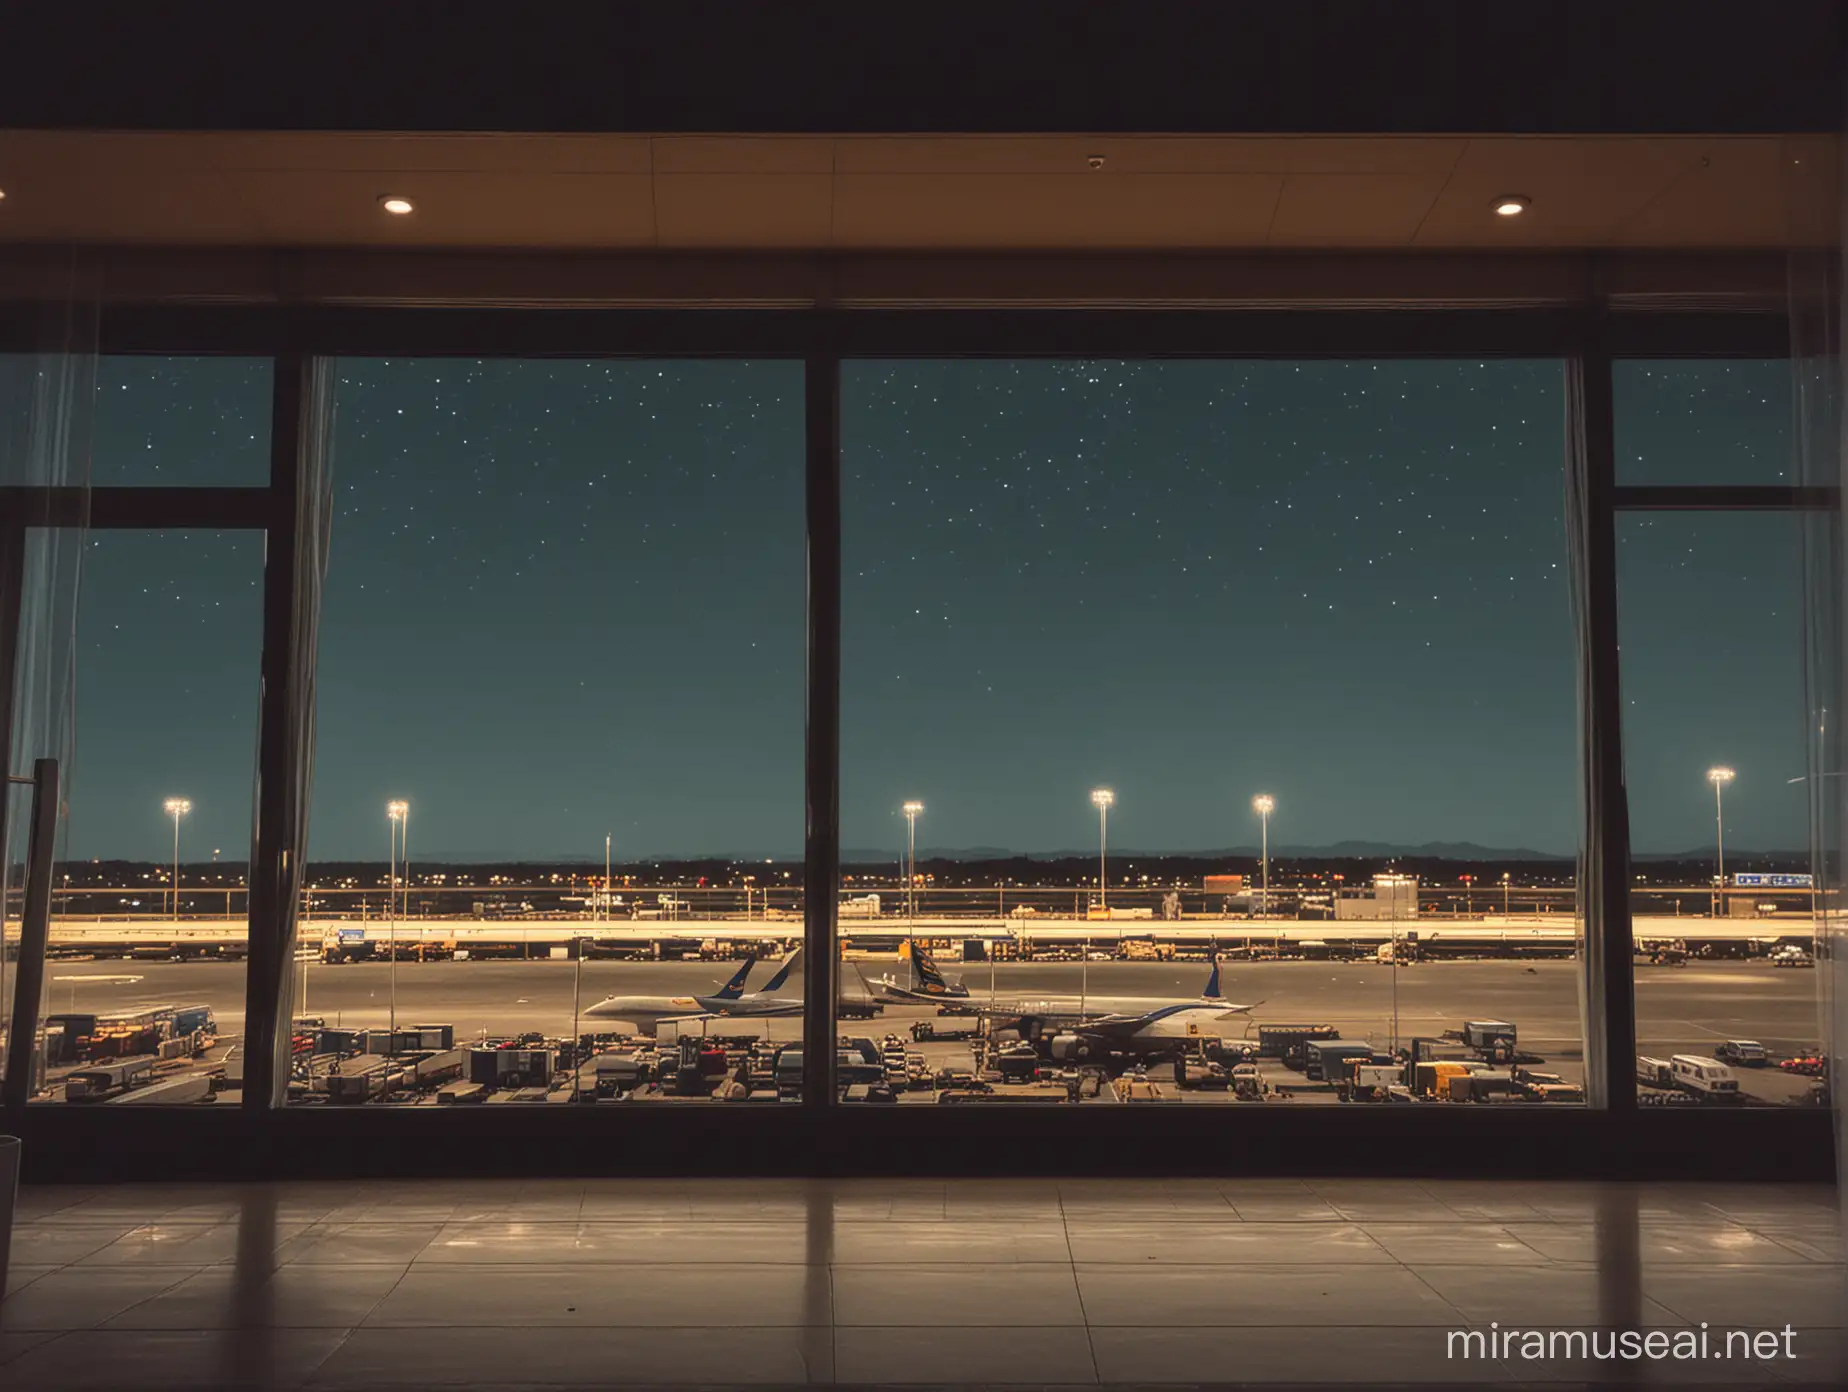 wes anderson style airport large window looking out at night
